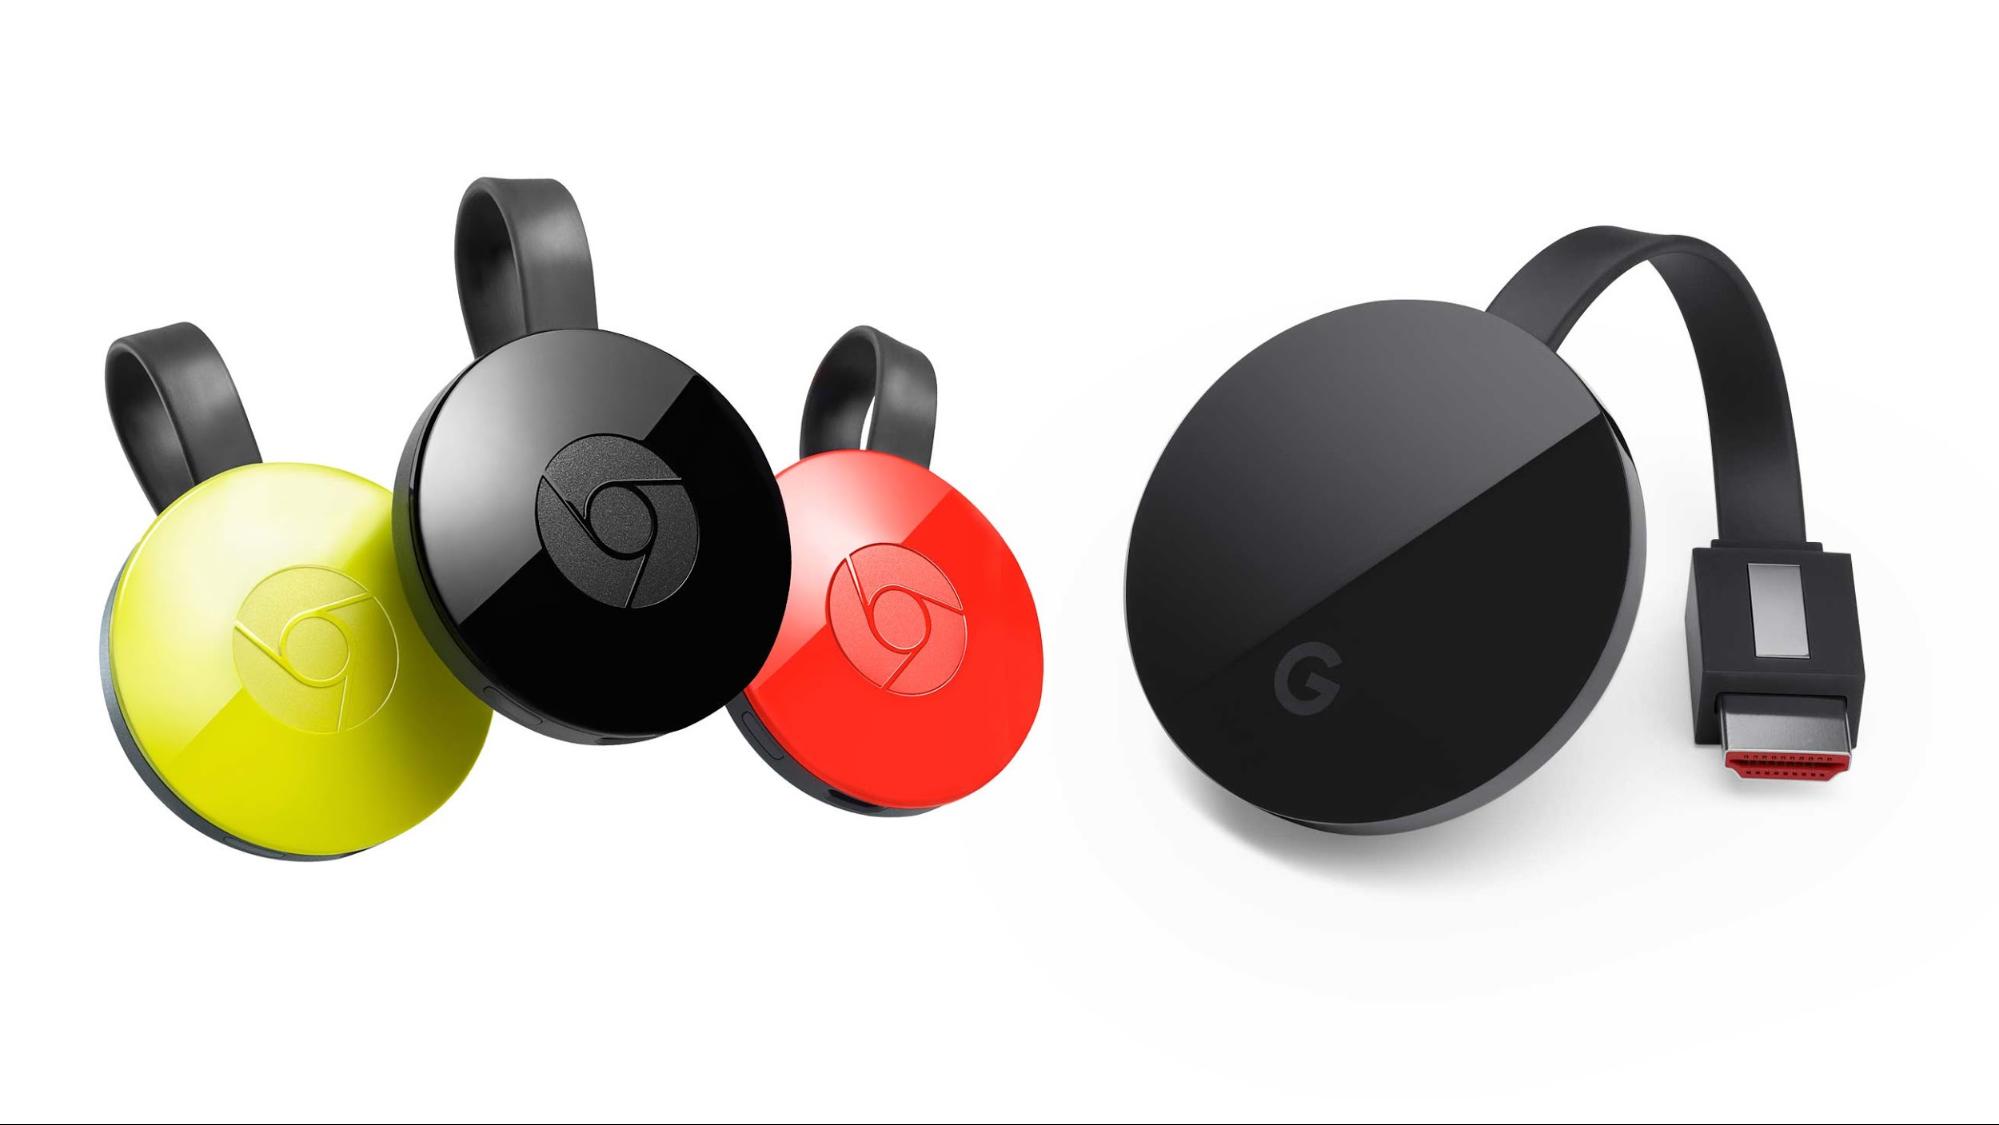 The new Chromecast Ultra vs the old what's changed | TechRadar